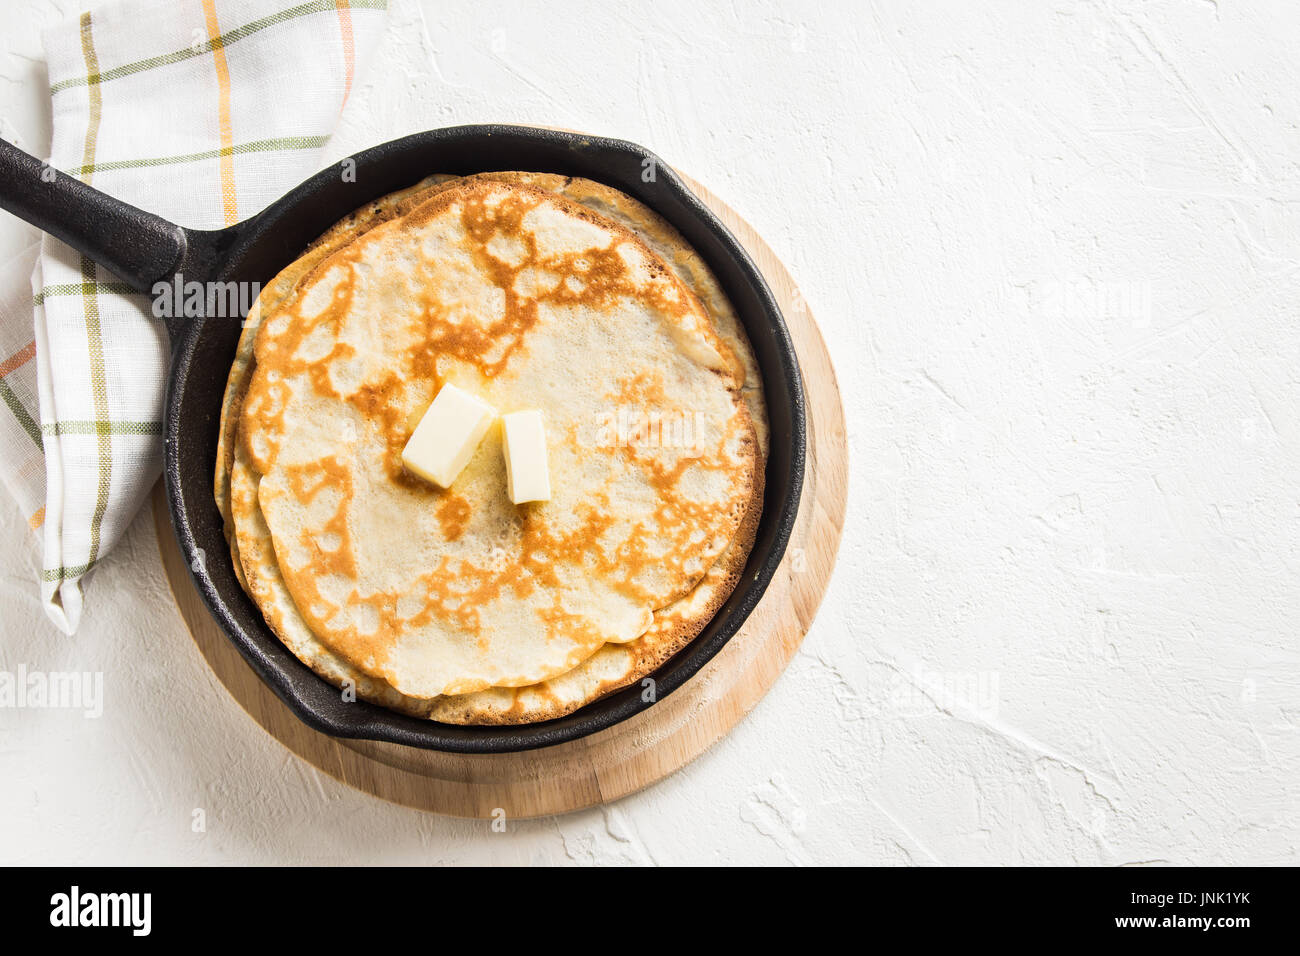 https://c8.alamy.com/comp/JNK1YK/homemade-crepes-with-butter-in-cast-iron-pan-and-ingredients-over-JNK1YK.jpg